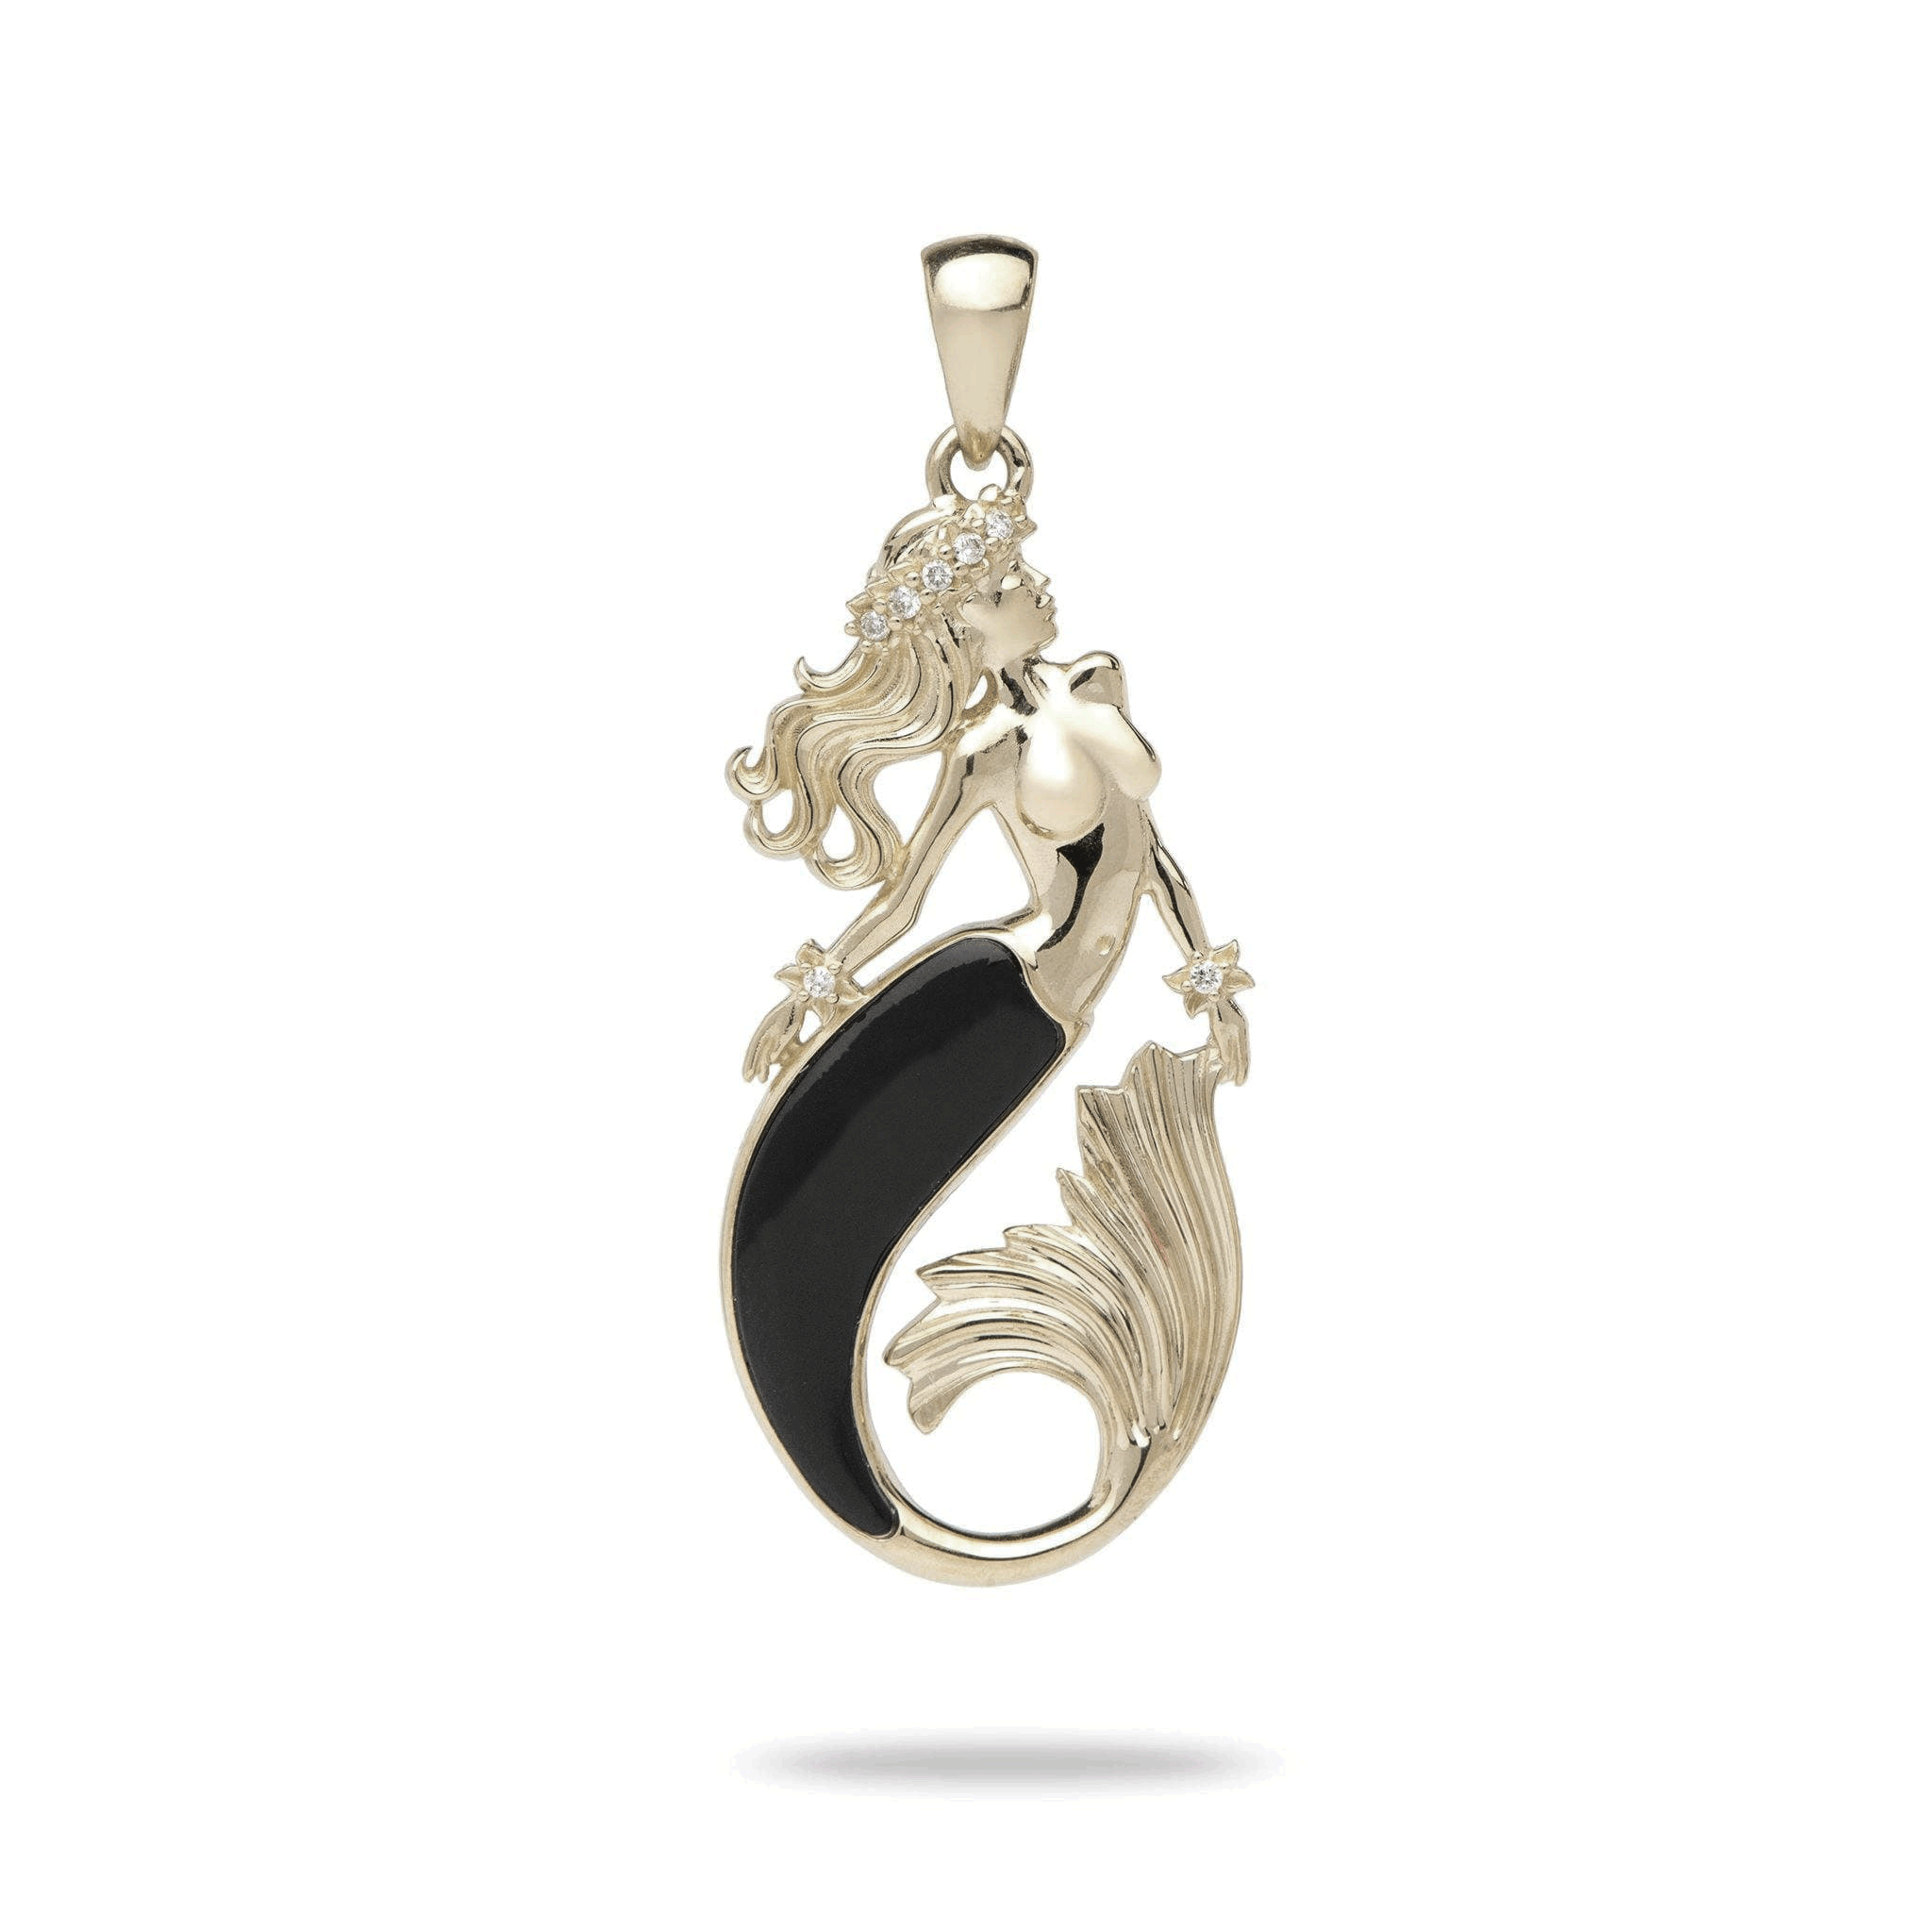 Sealife Mermaid Black Coral Pendant in Gold with Diamonds - 37mm